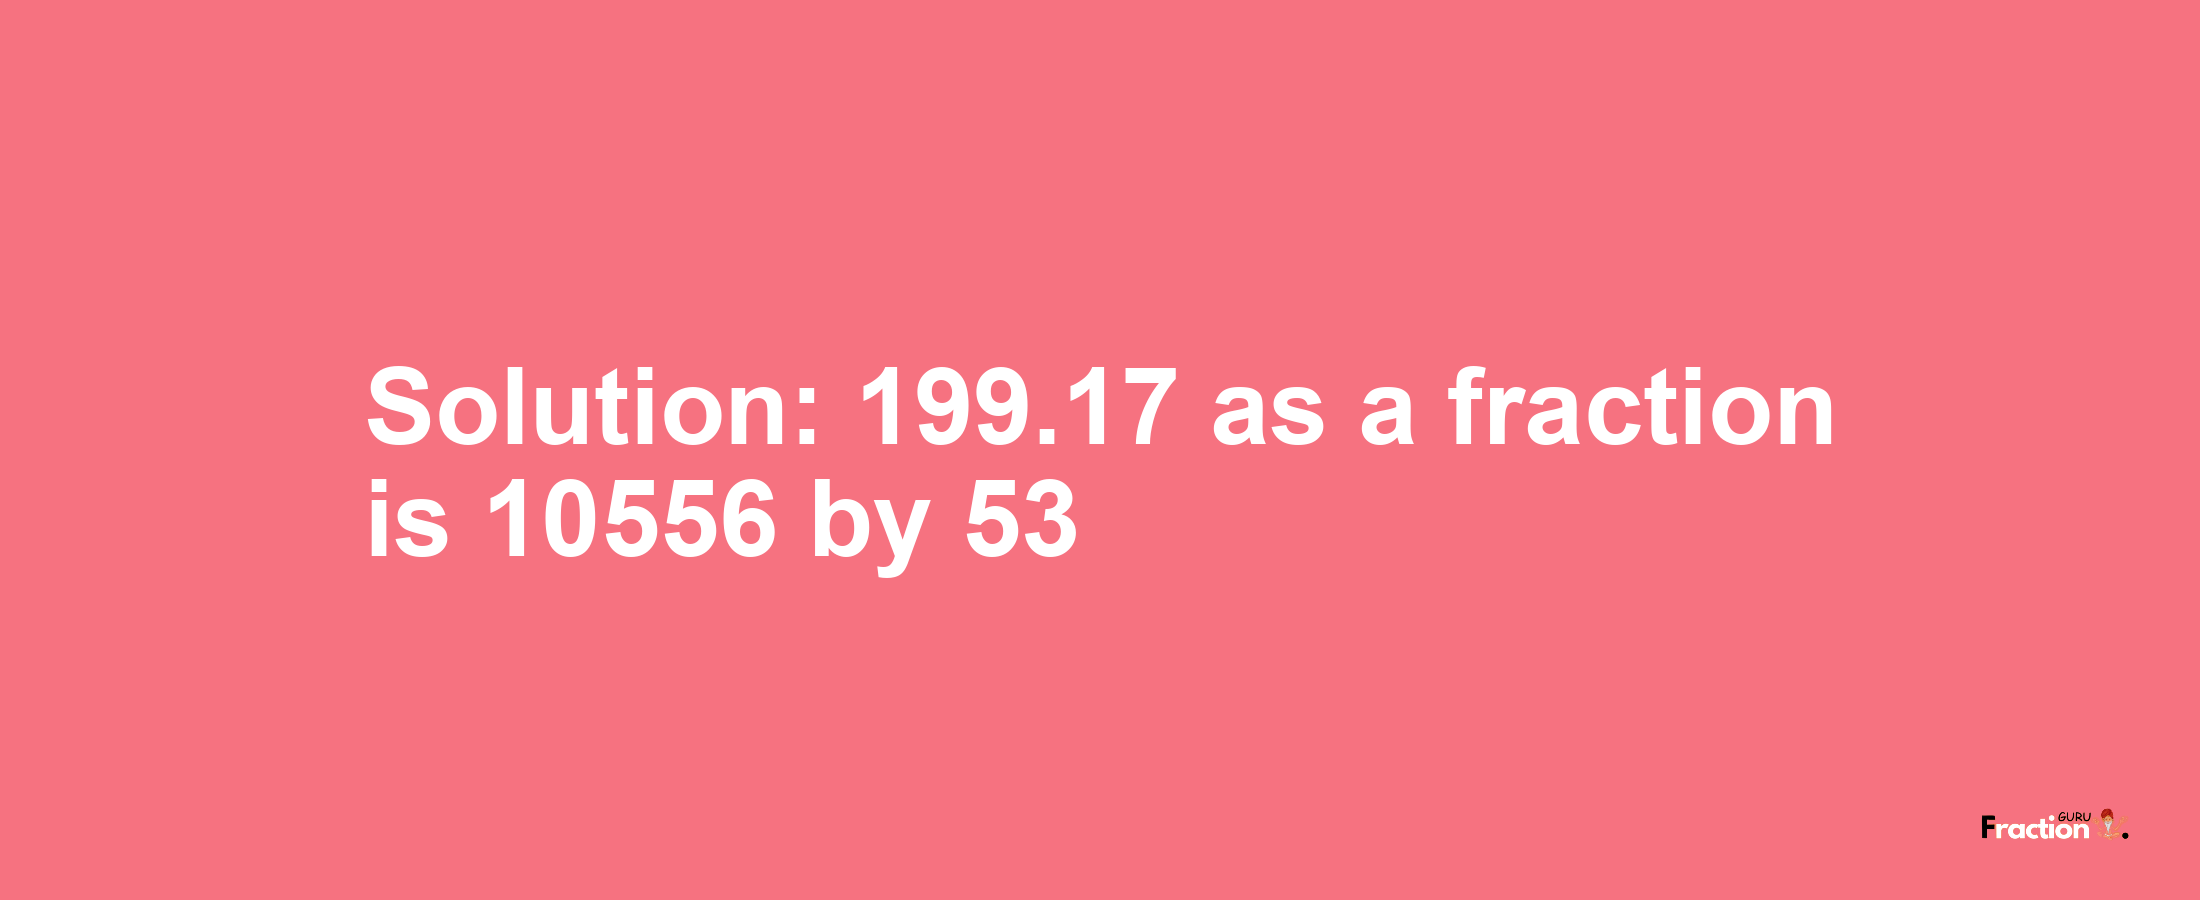 Solution:199.17 as a fraction is 10556/53